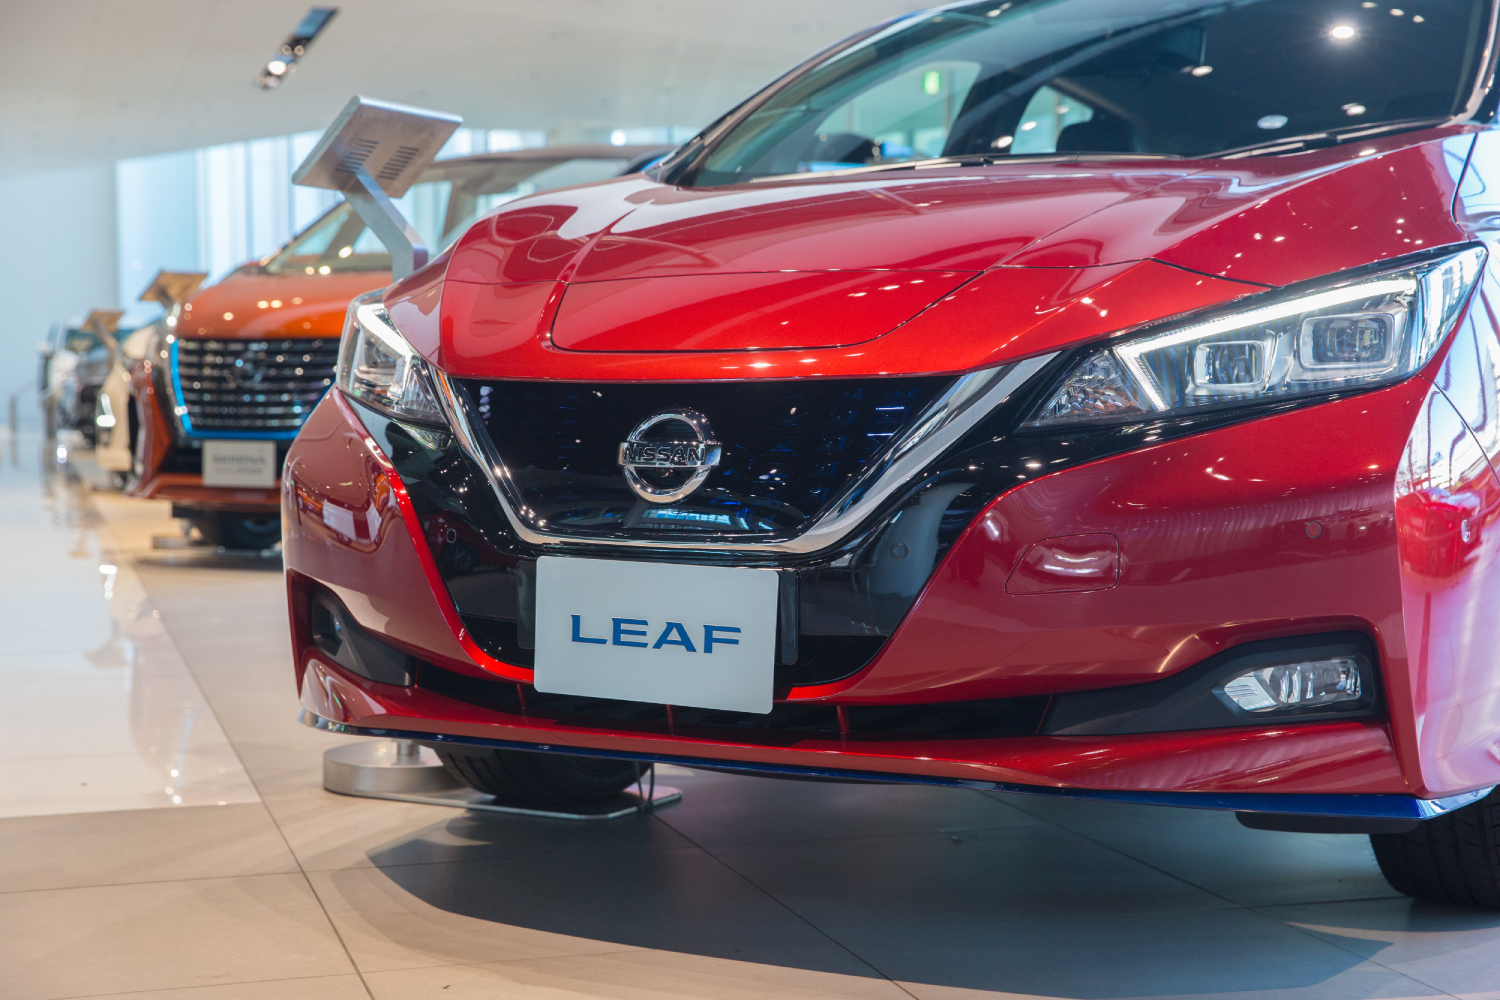 The Nissan Leaf is one of Consumer Reports most reliable used cars